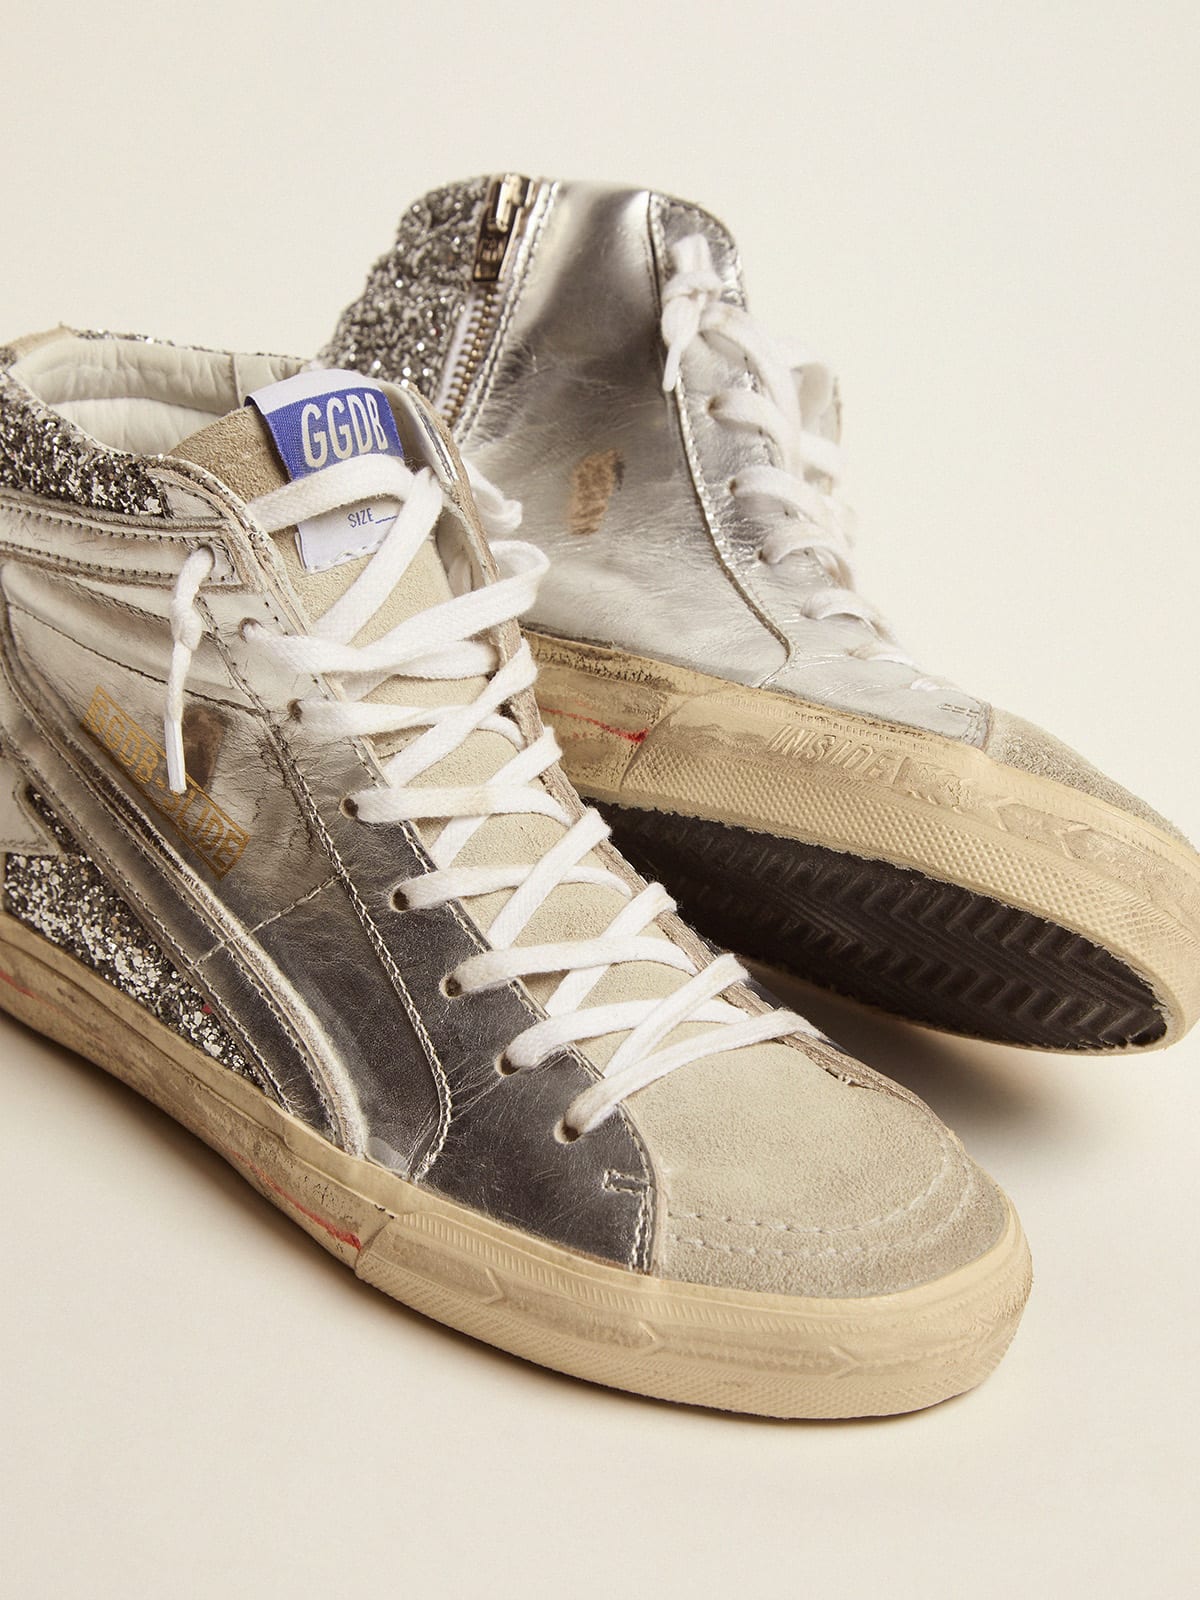 Slide sneakers with upper in laminated leather and silver glitter 